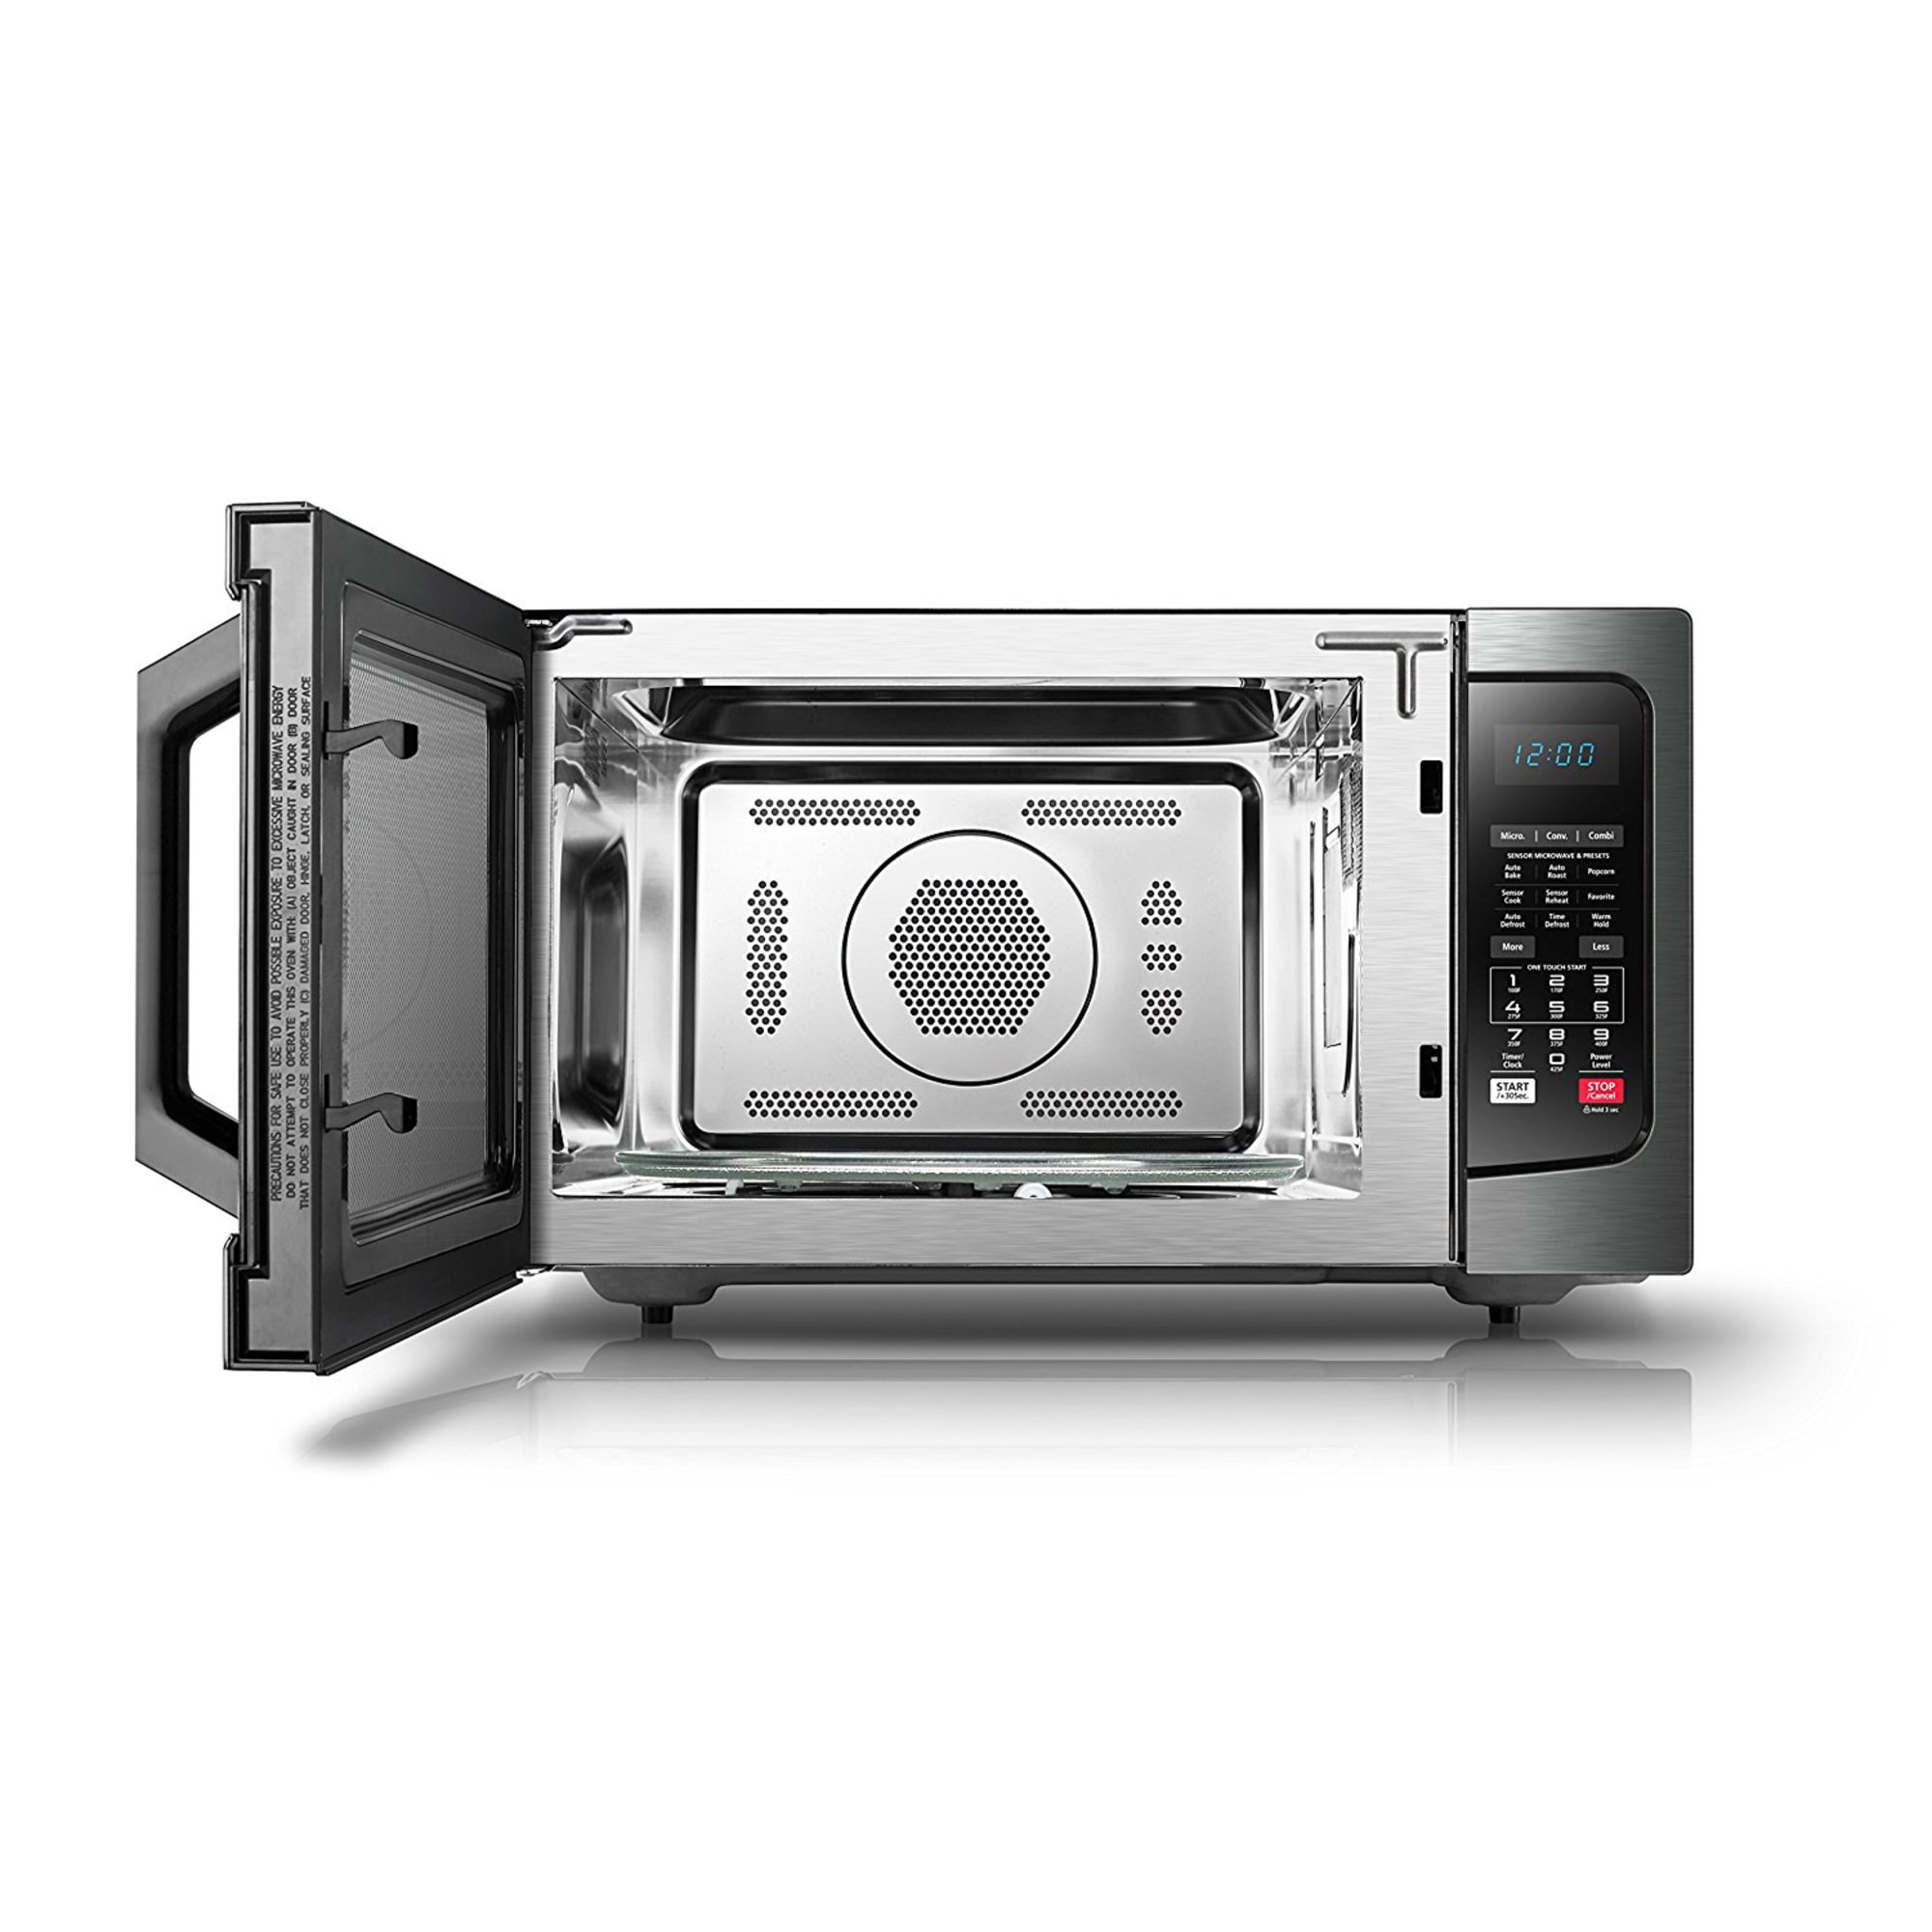 Toshiba ML2-EC42SAESS 1.5 Cu. Ft. Convection Microwave, Stainless Steel - image 5 of 8